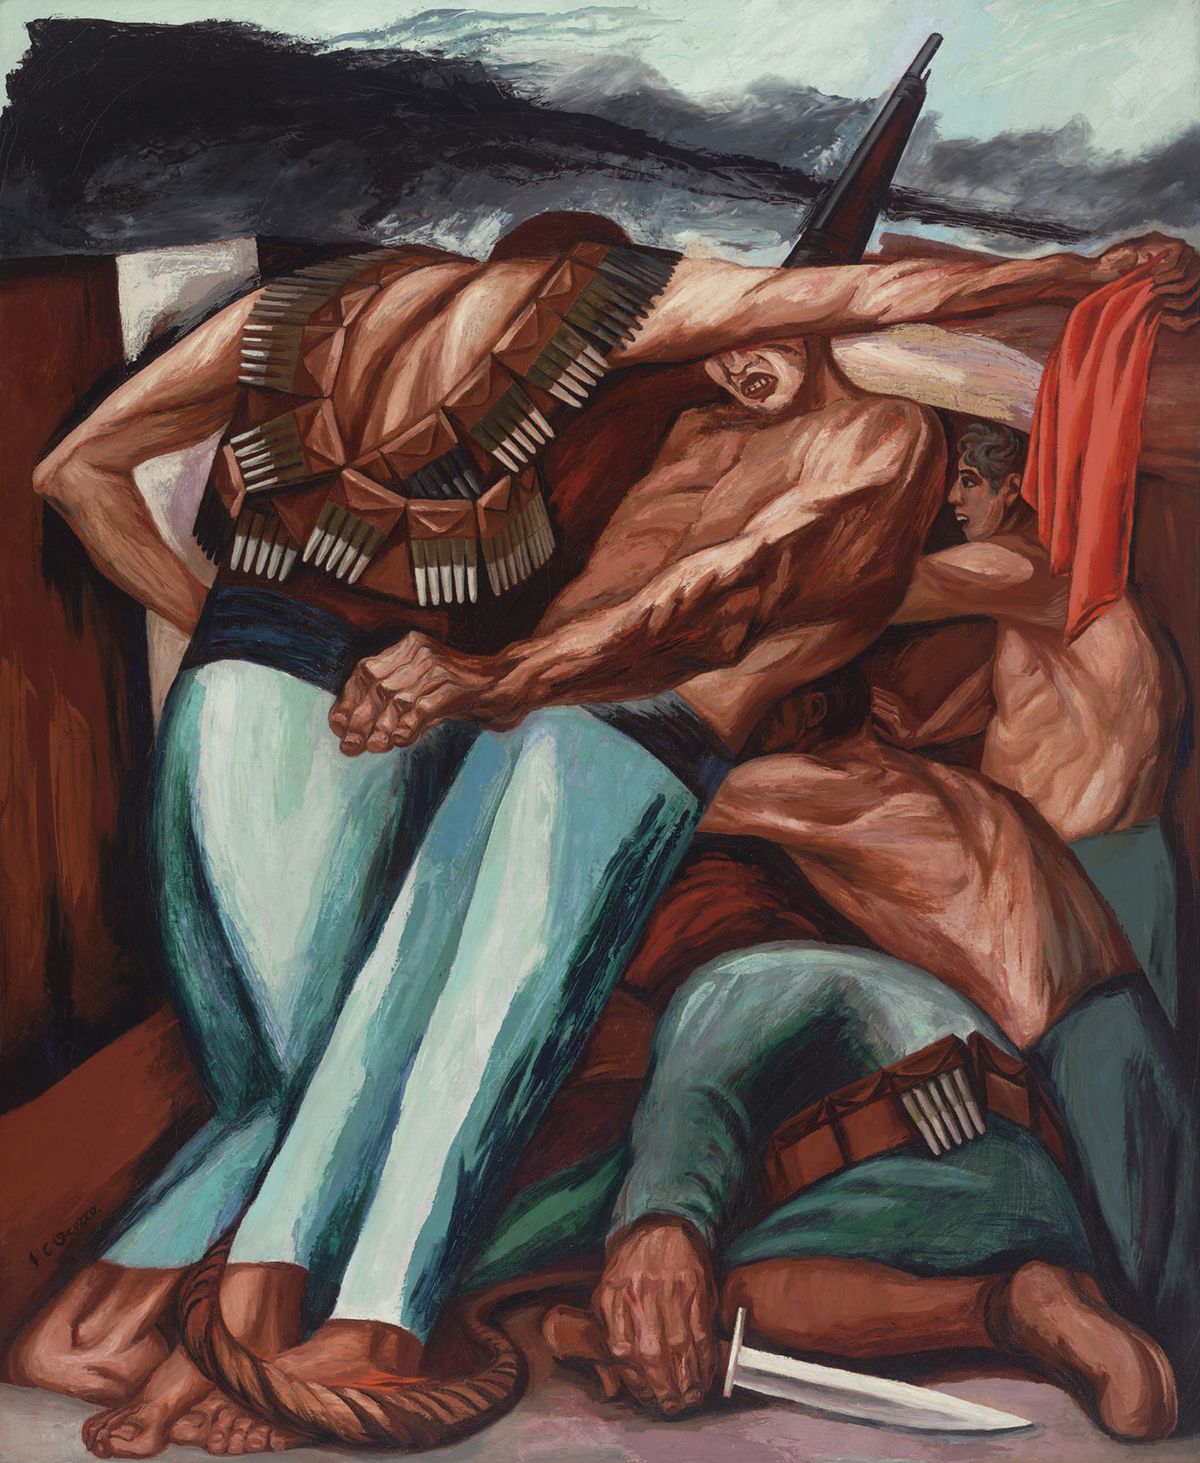 José Clemente Orozco’s Mexican Revolution work Barricade (1931) Photo: Courtesy of the Whitney Museum of American Art; © The Estate of Philip Guston, courtesy McKee Gallery